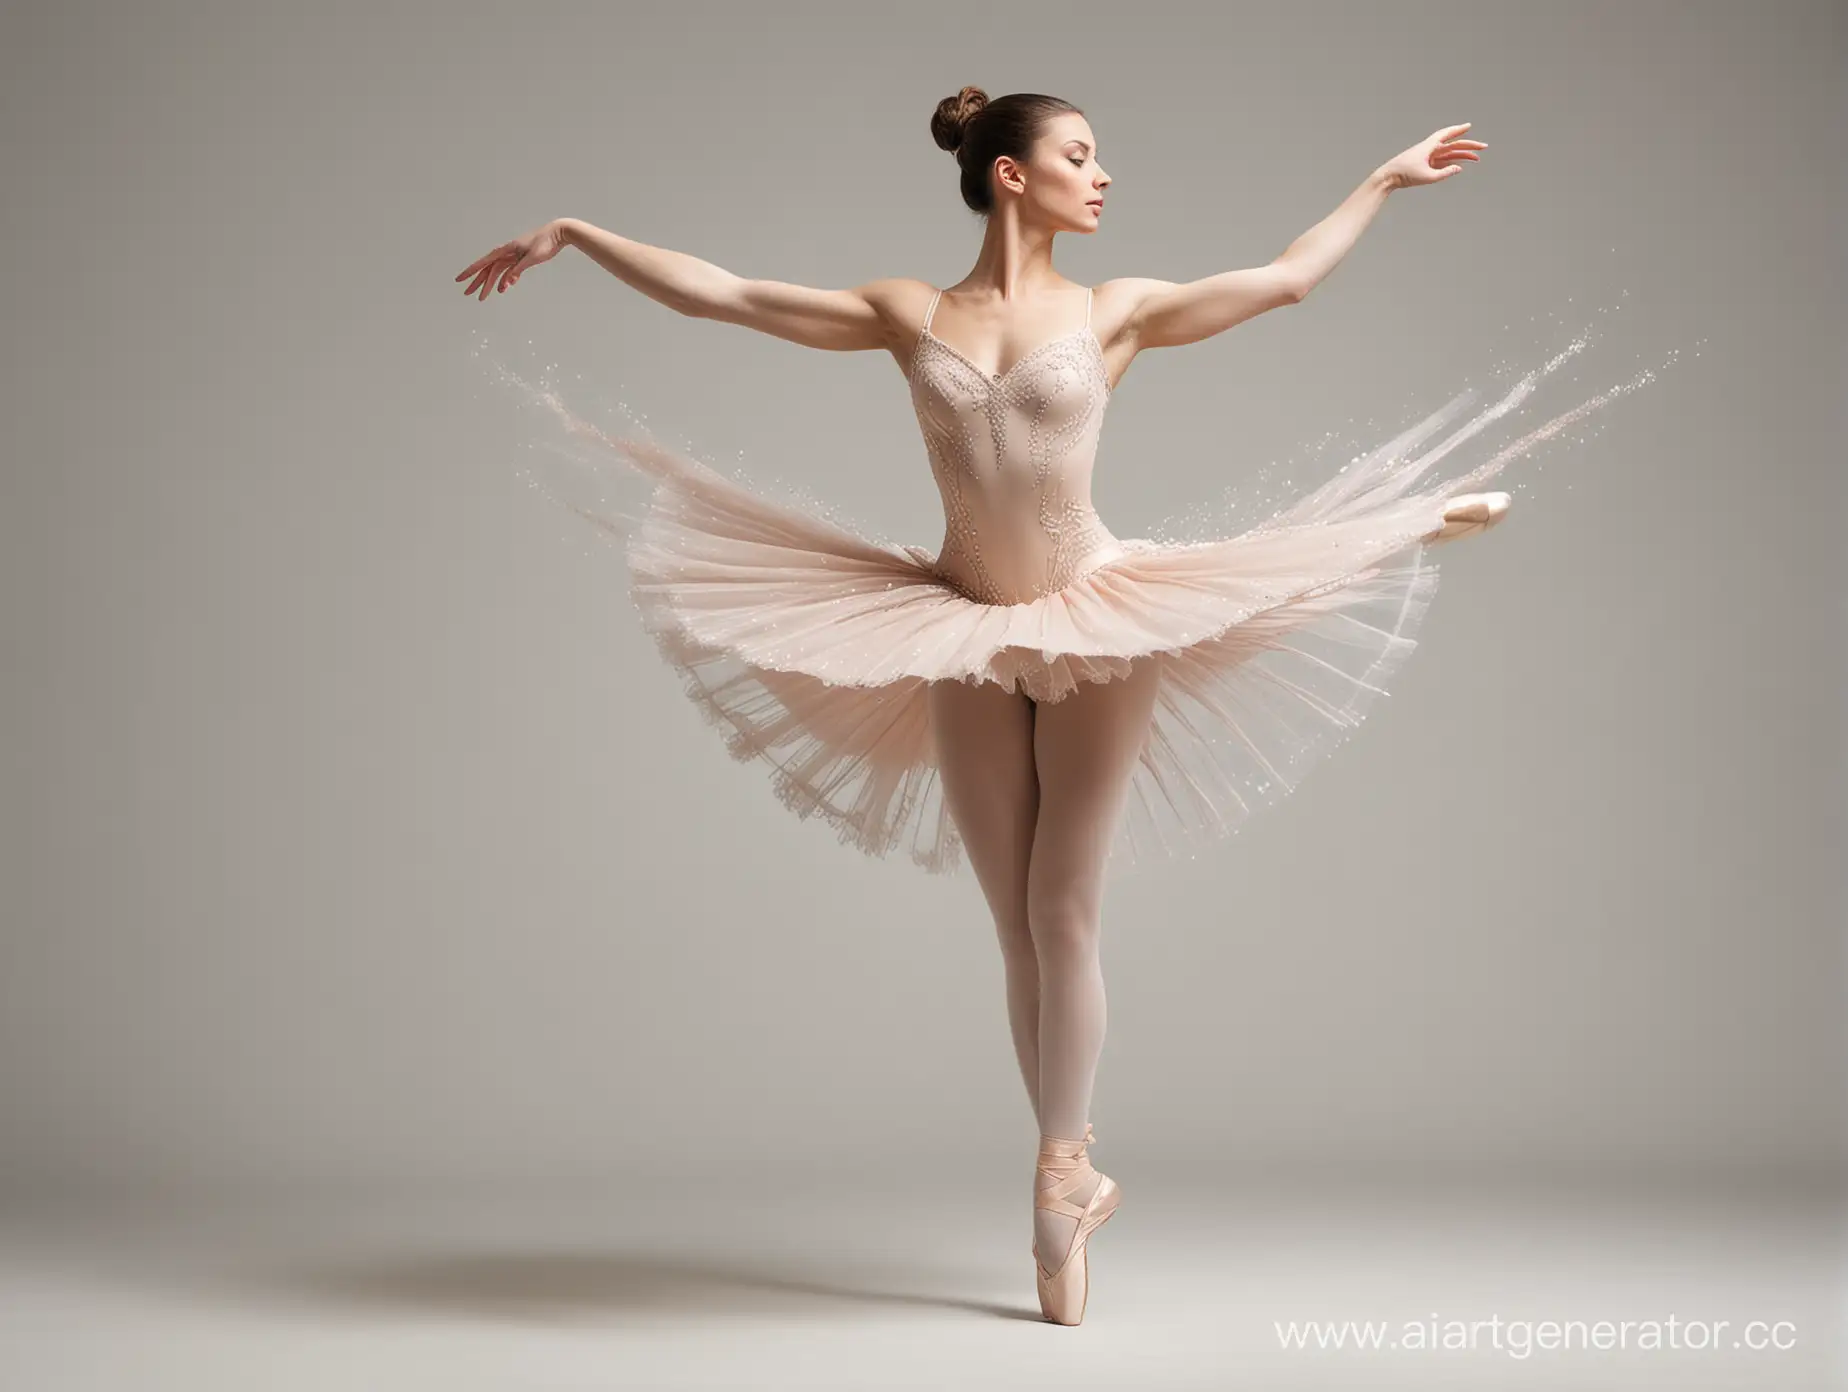 Elegant-Ballerina-Dancing-in-Graceful-Motion-with-Visible-Anatomy